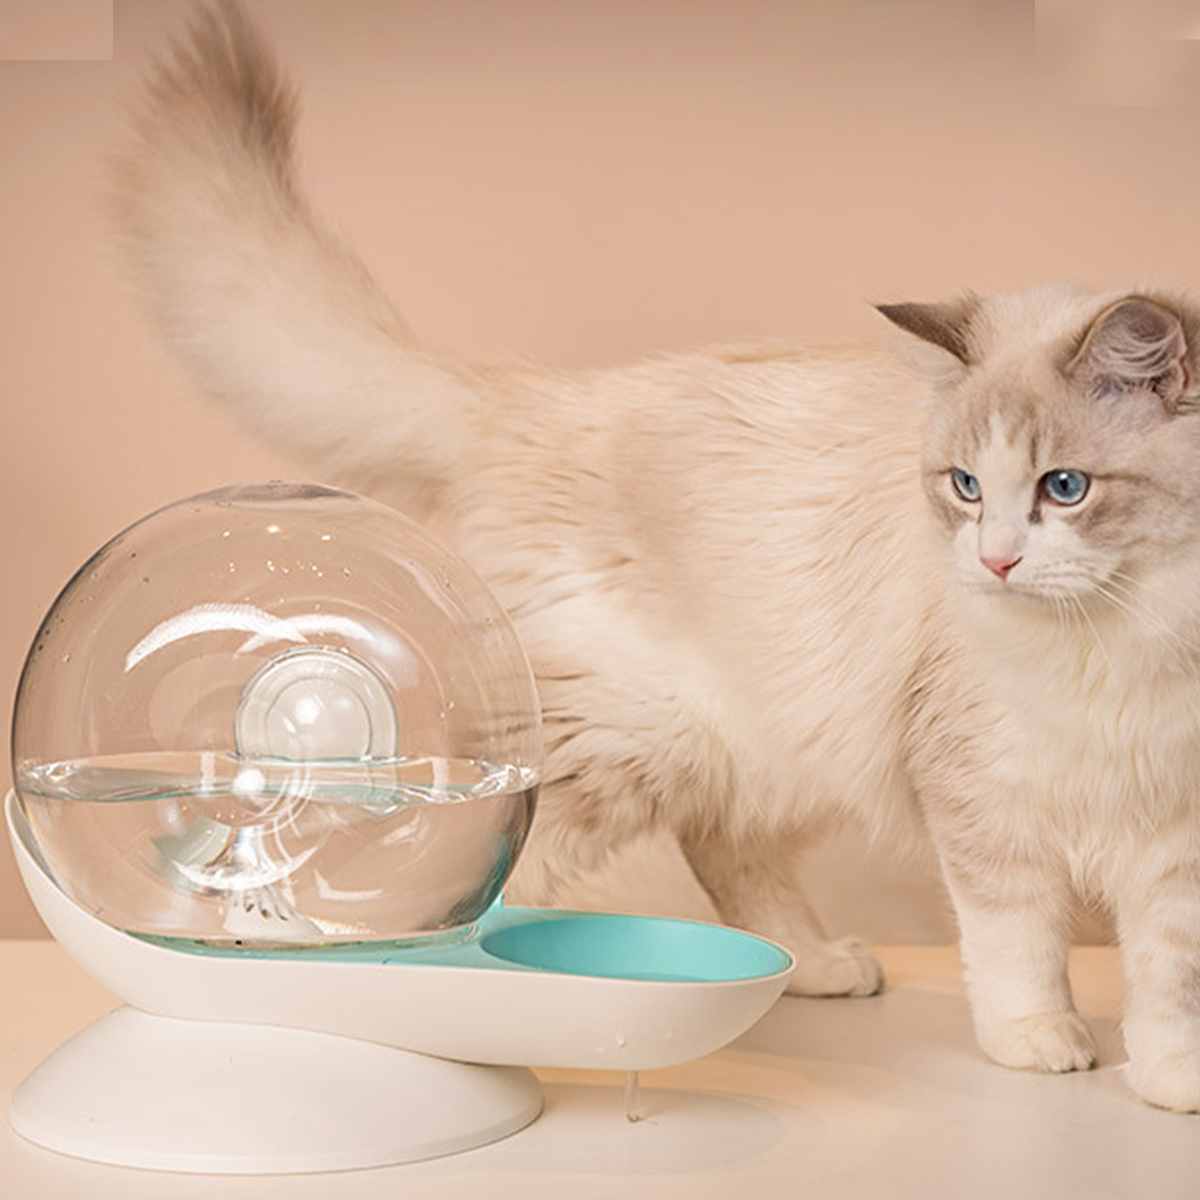 Snails-Bubble-Automatic-Cat-Water-Bowl-Fountain-for-Pets-Water-Dispenser-Large-Drinking-Bowl-Cat-Dri-1811587-8